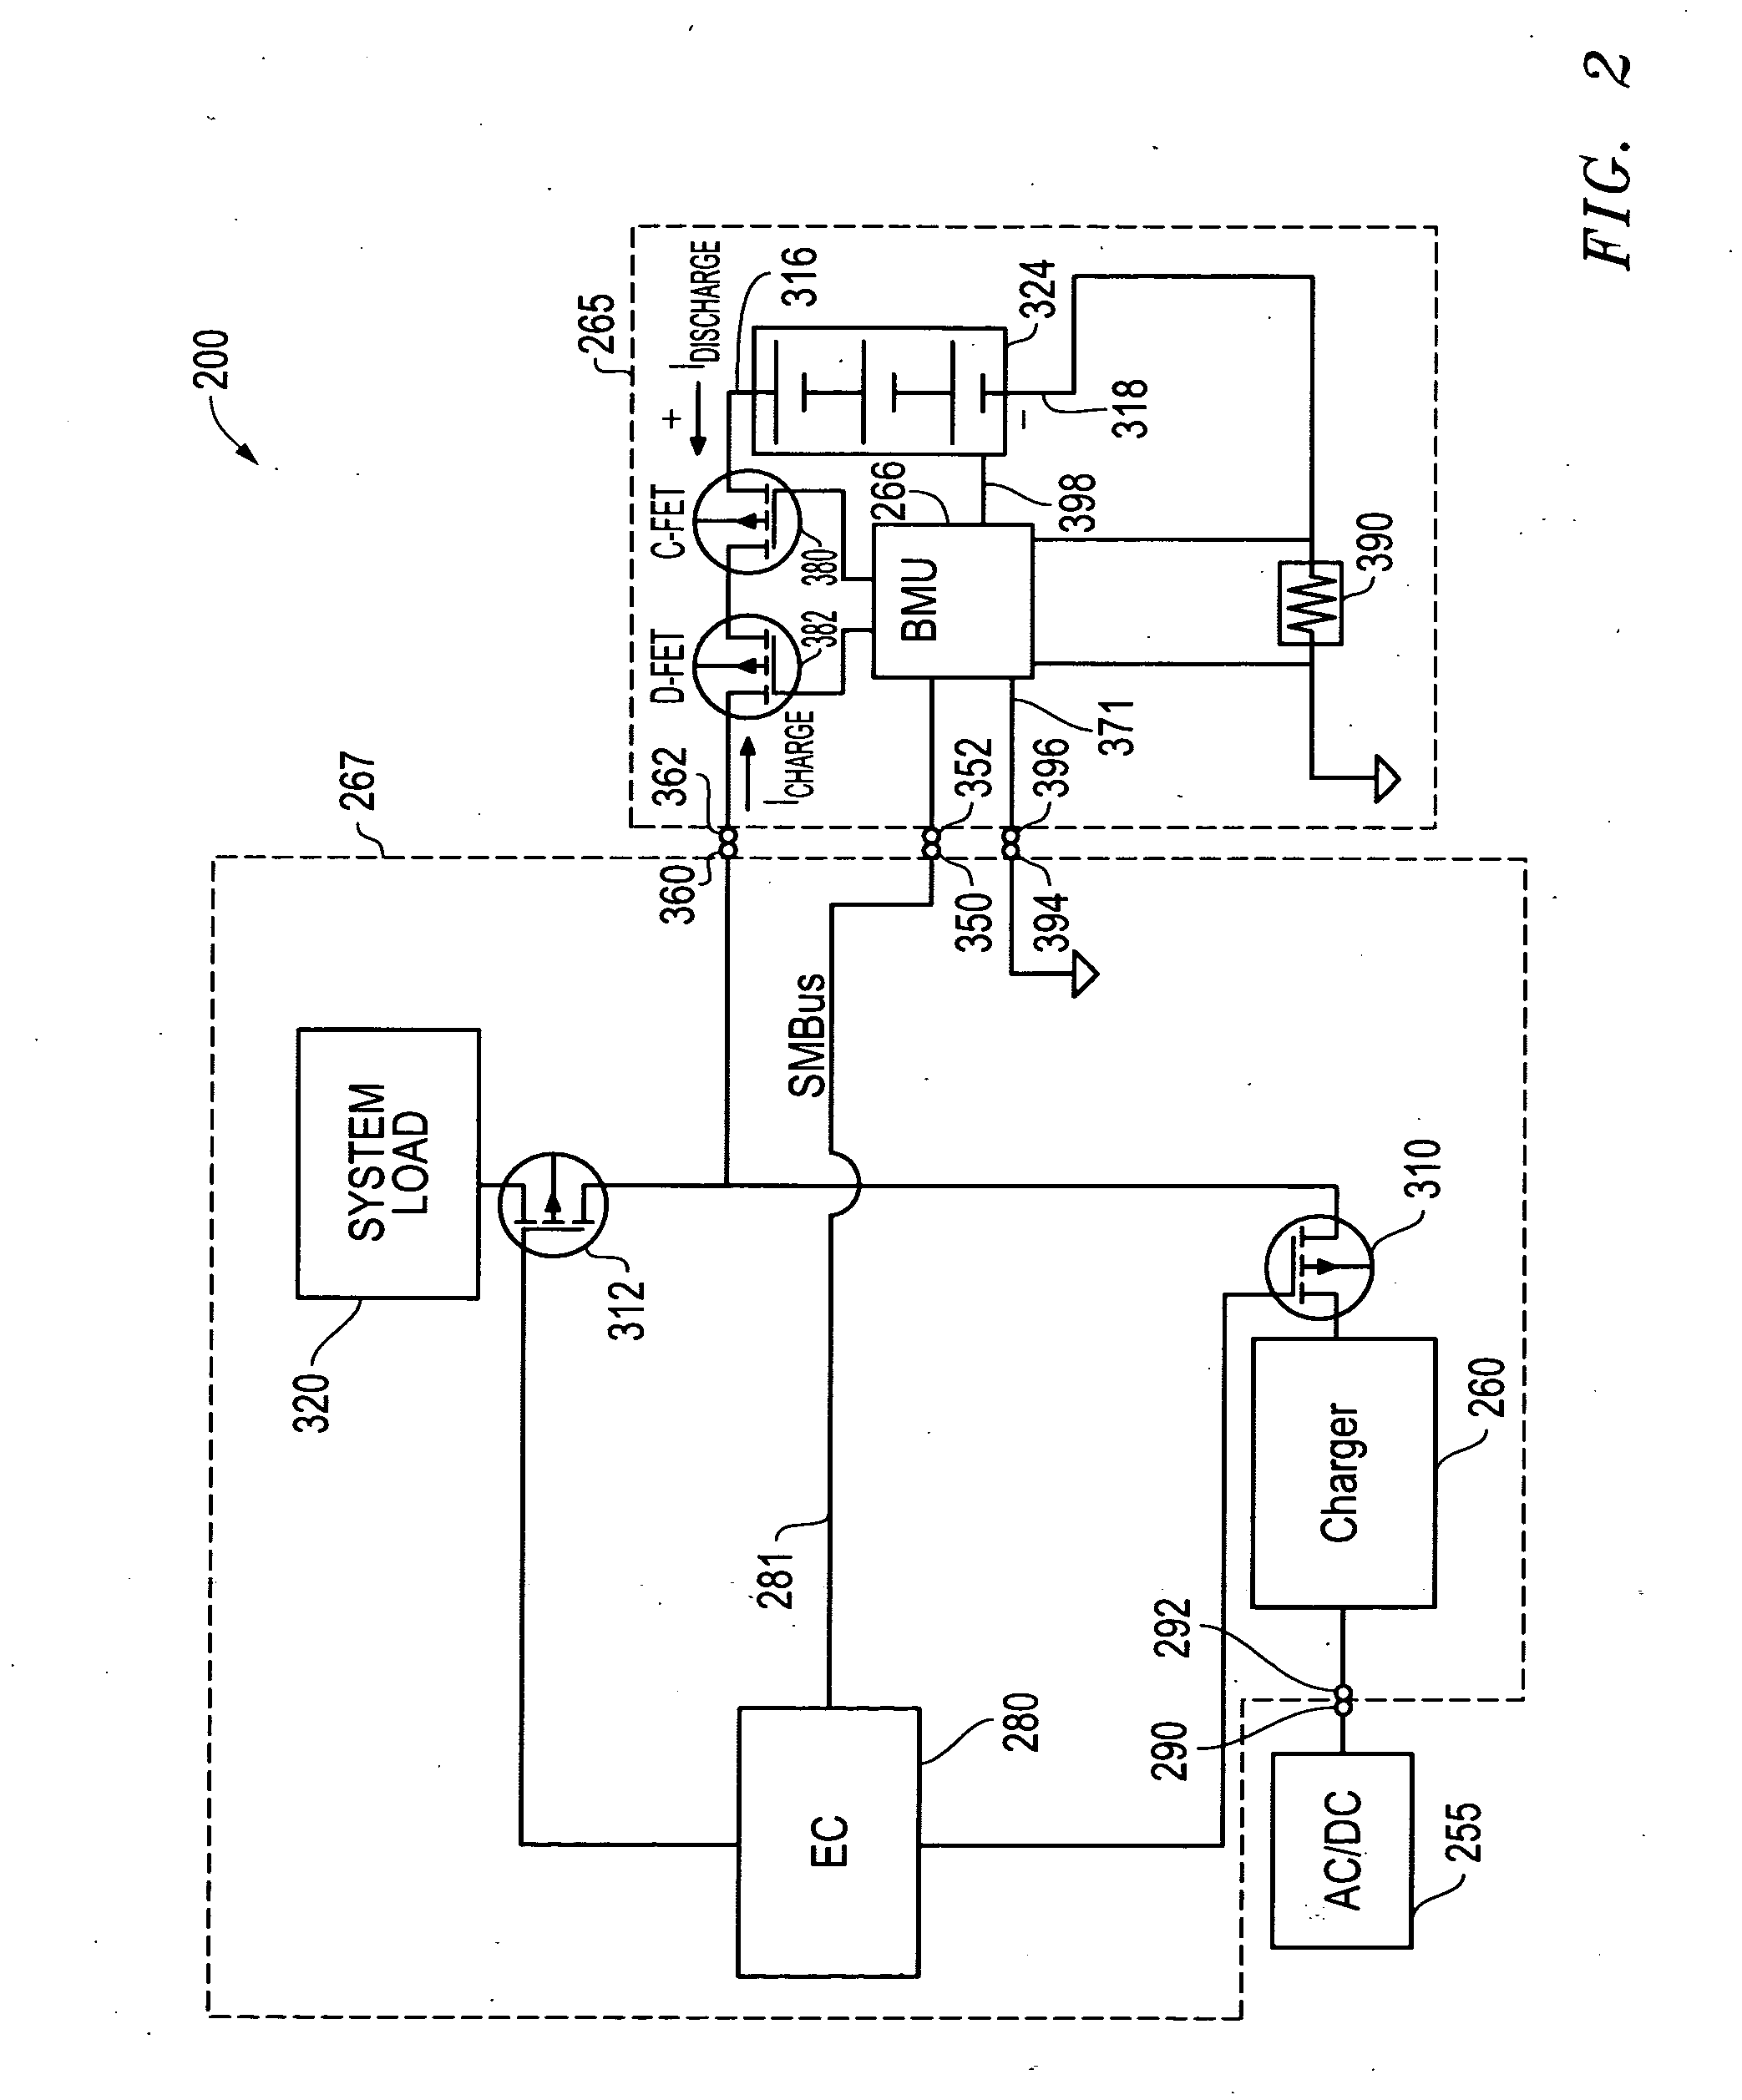 Flexible cell battery systems and methods for powering information handling systems